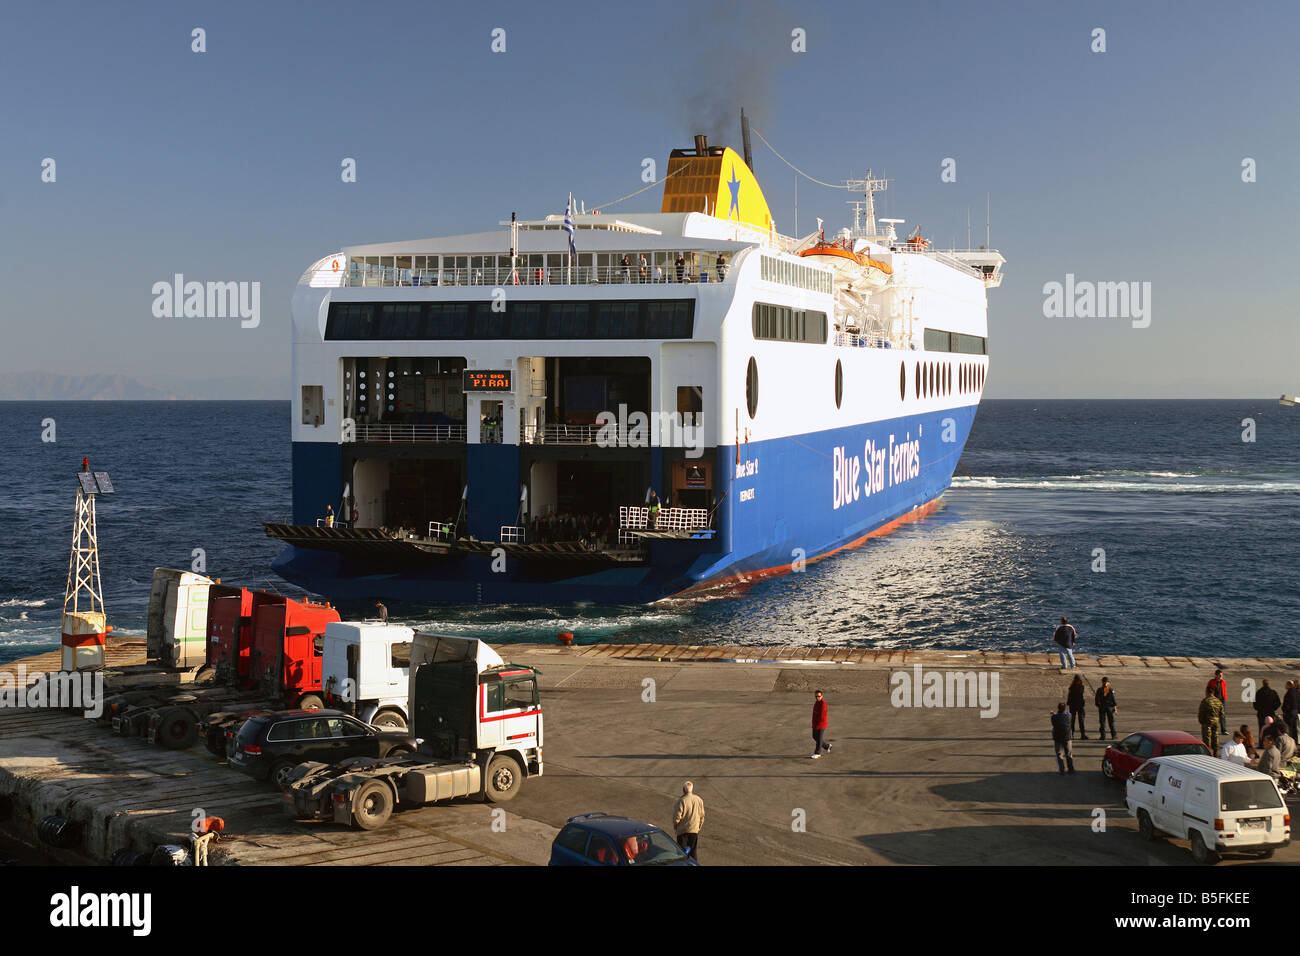 A ferry ship in the marina in Rhodes, Greece Stock Photo